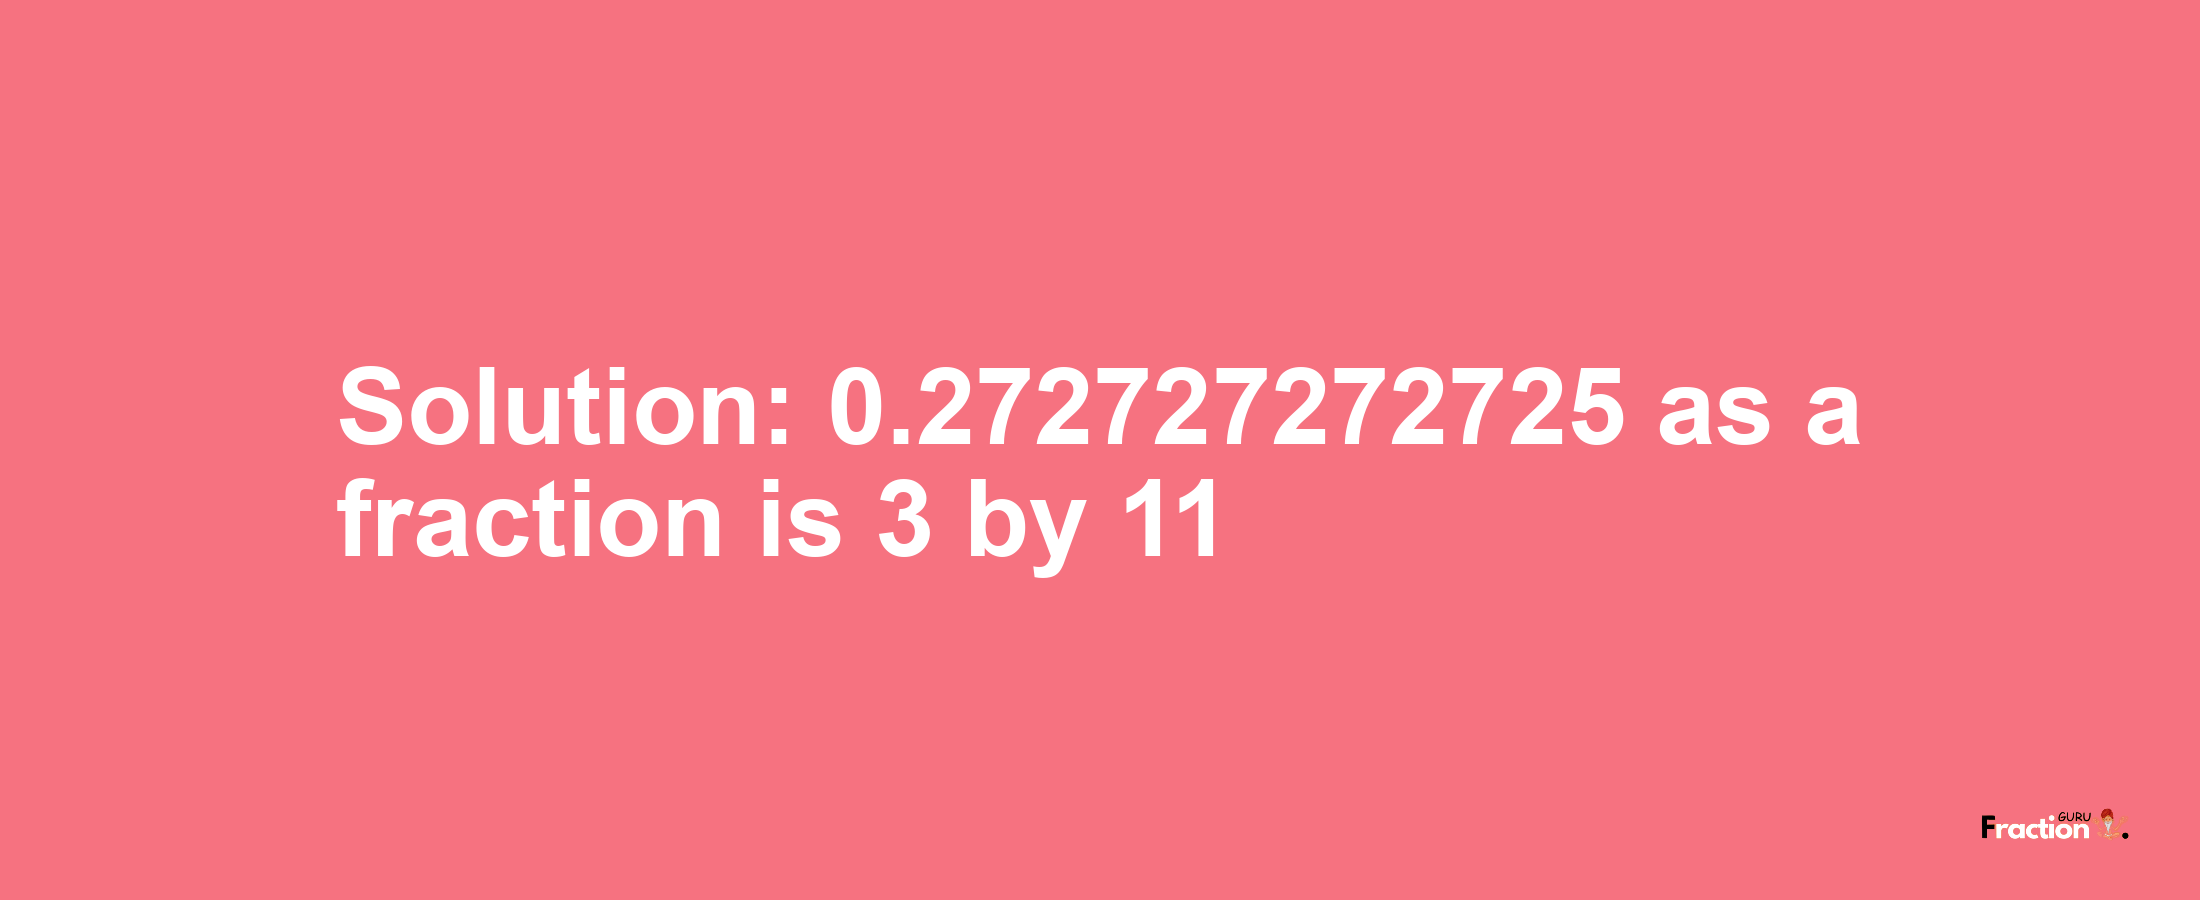 Solution:0.272727272725 as a fraction is 3/11